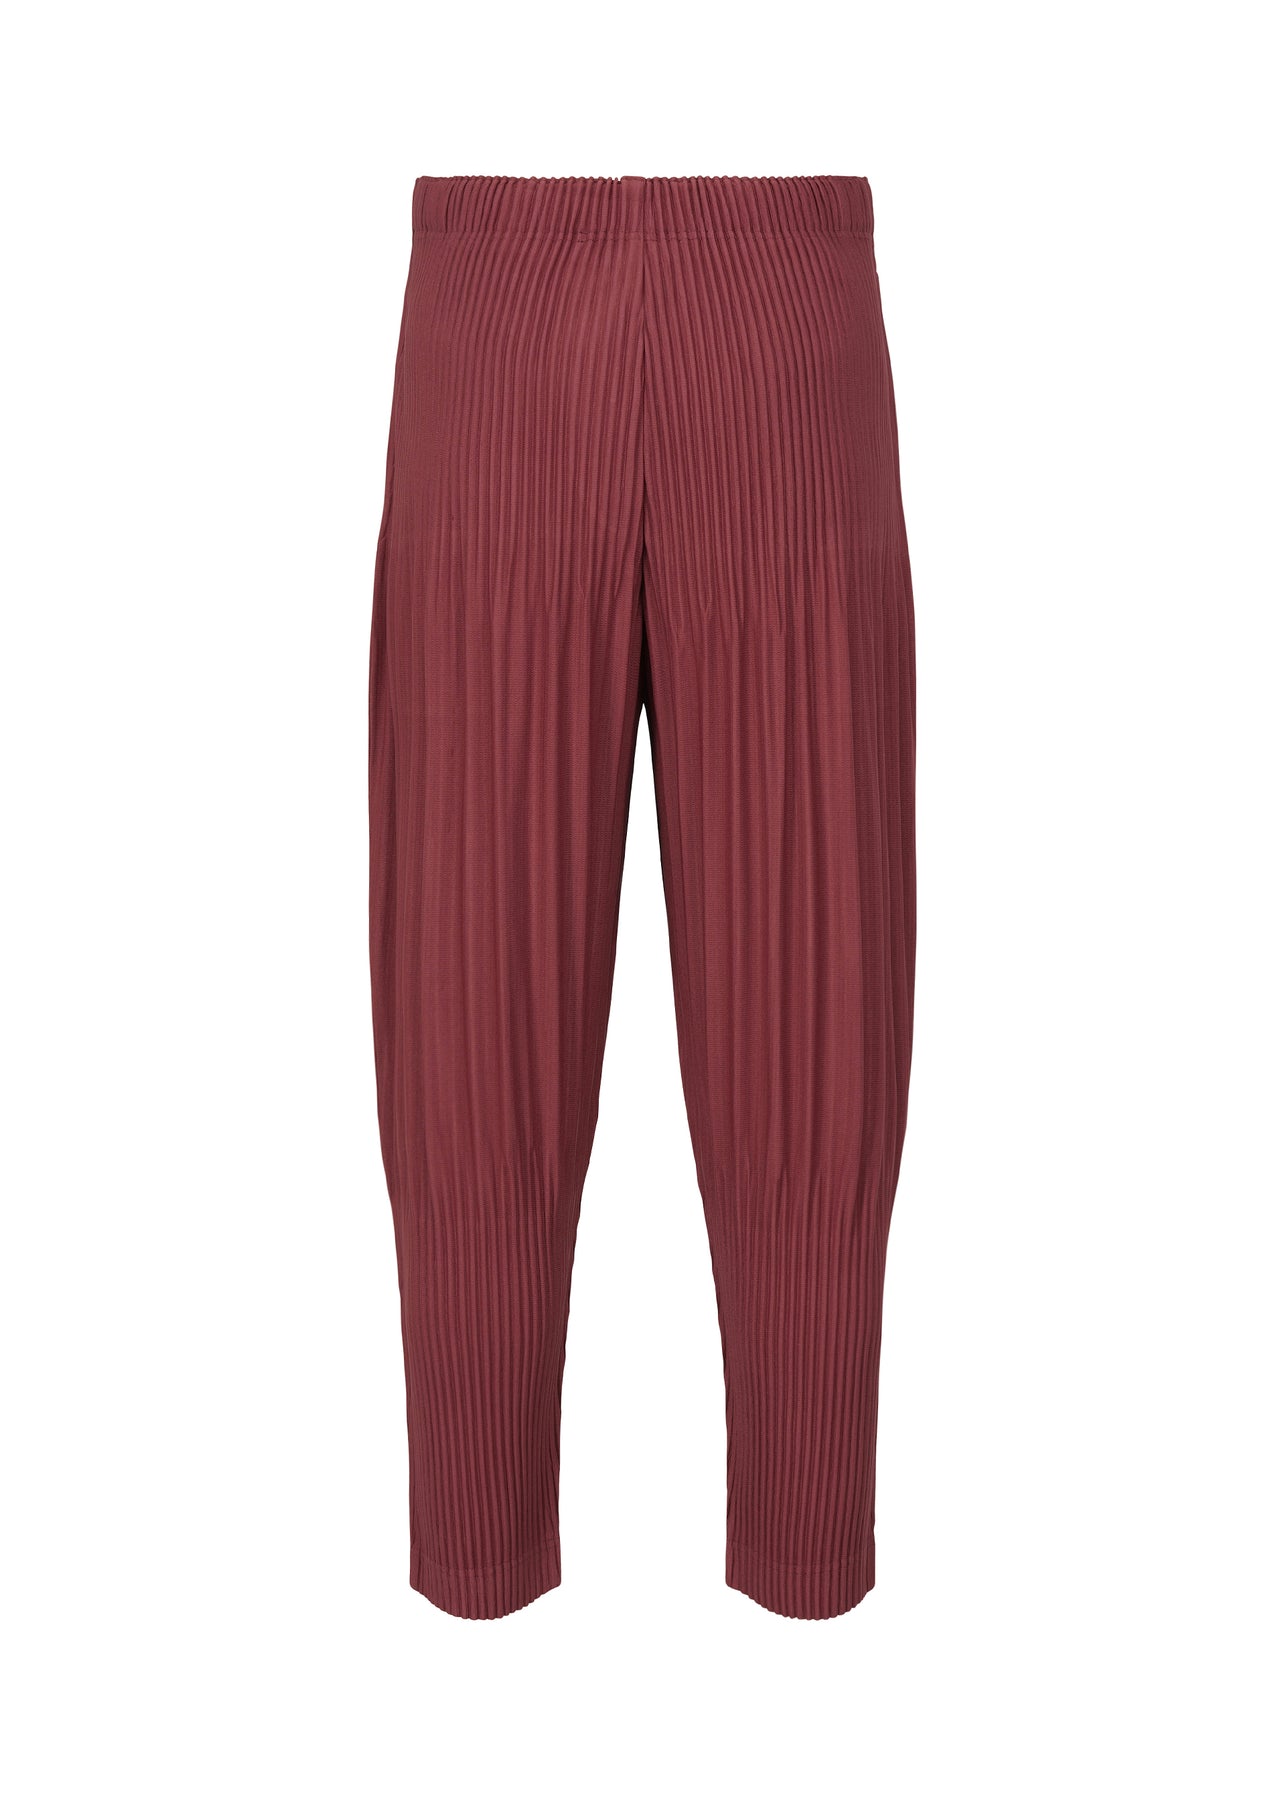 COLOR PLEATS PANTS ISSEY MIYAKE ISSEY | STORE official The ONLINE | MIYAKE USA